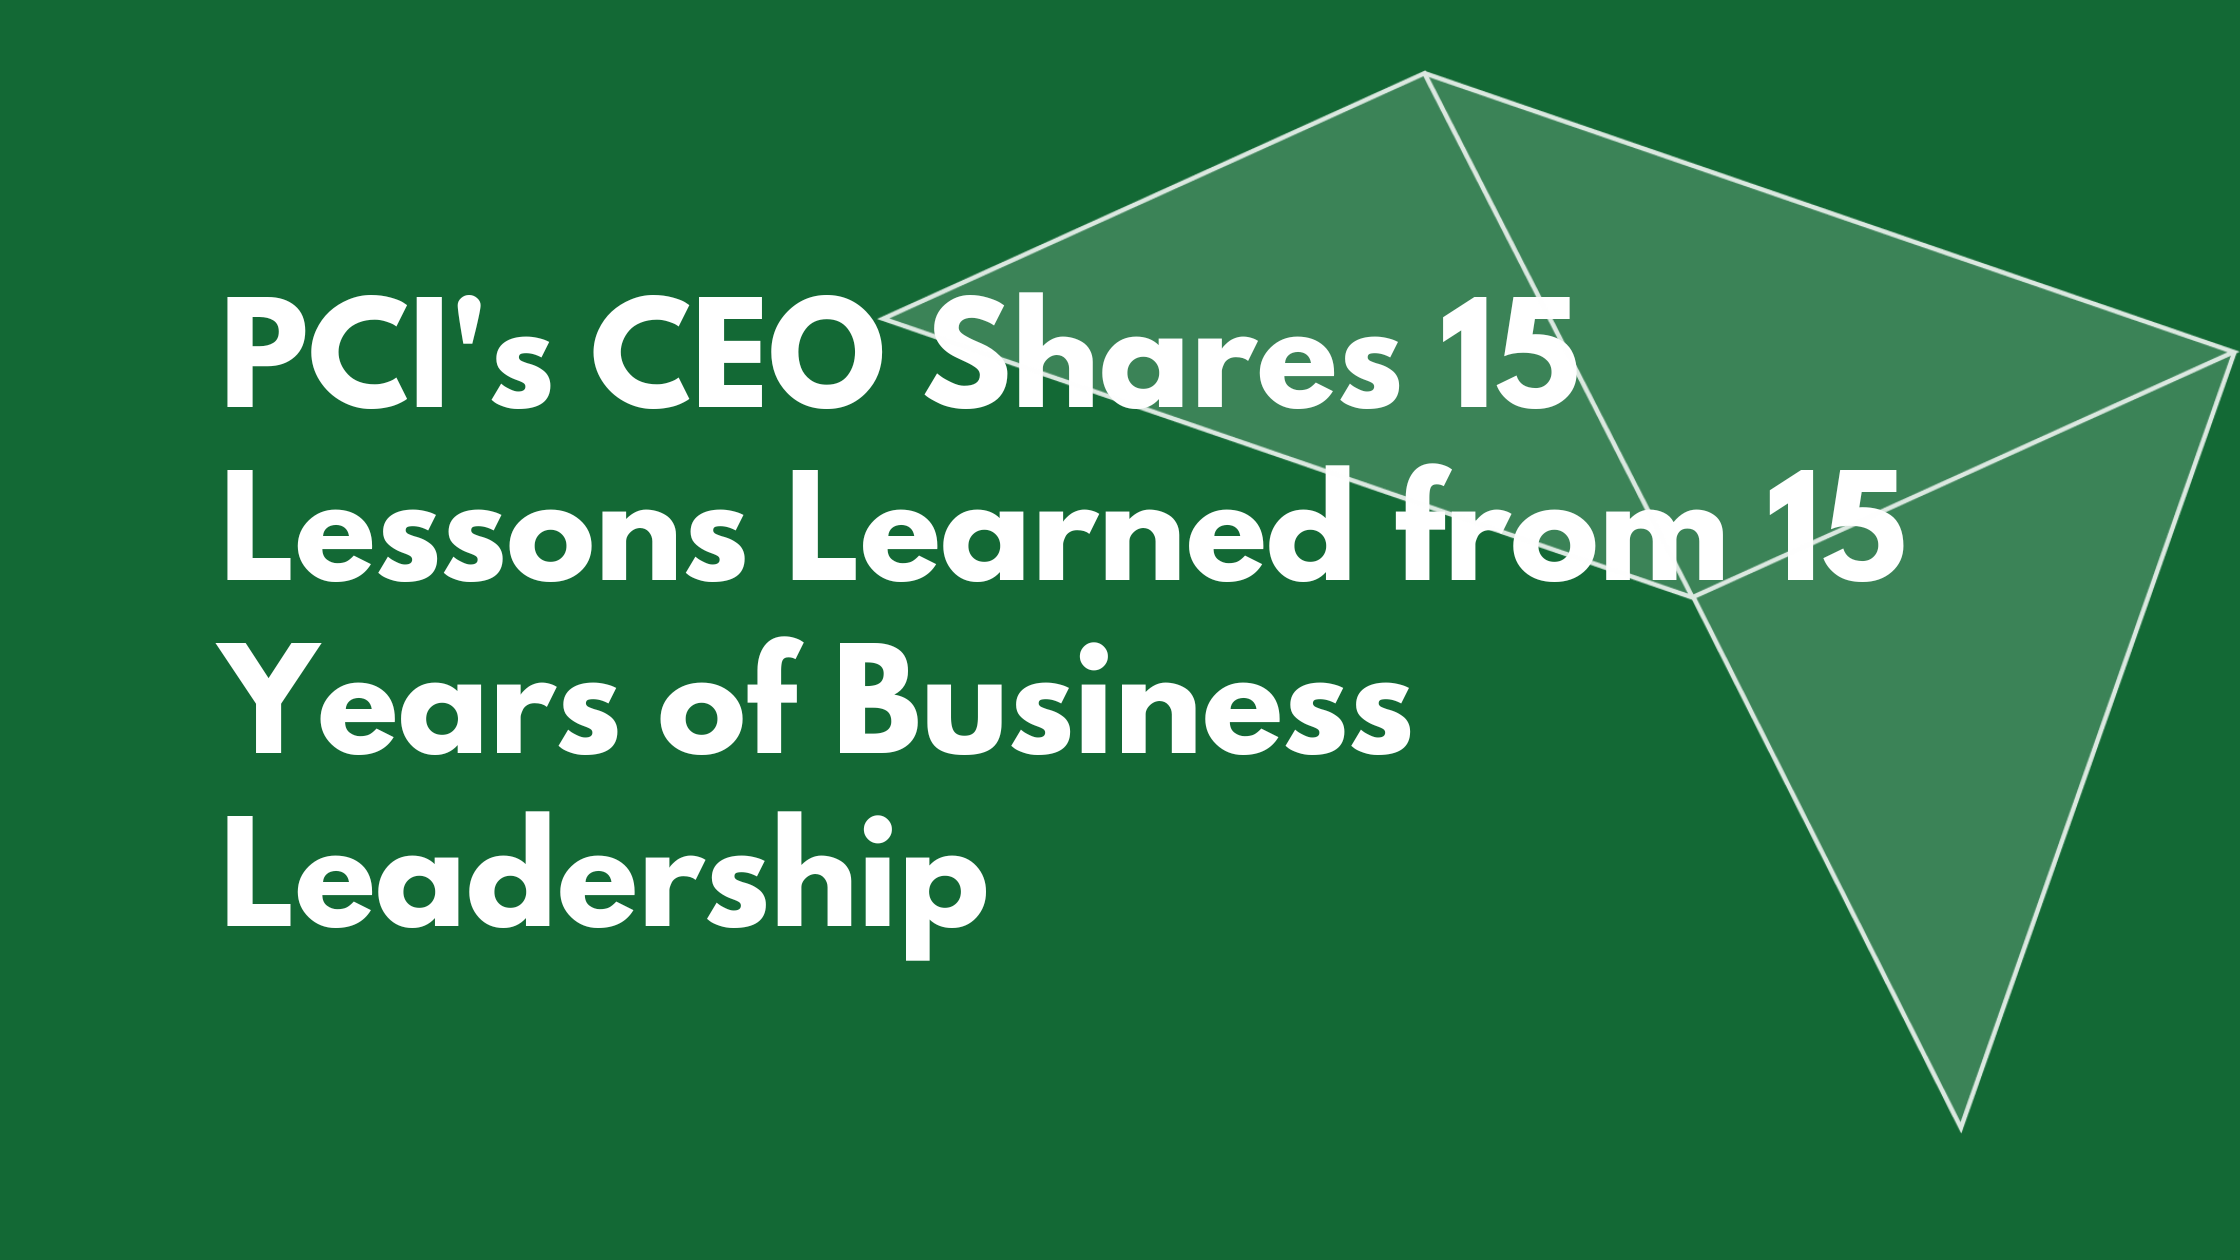 PCI's CEO Shares 15 Lessons Learned from 15 Years of Business Leadership